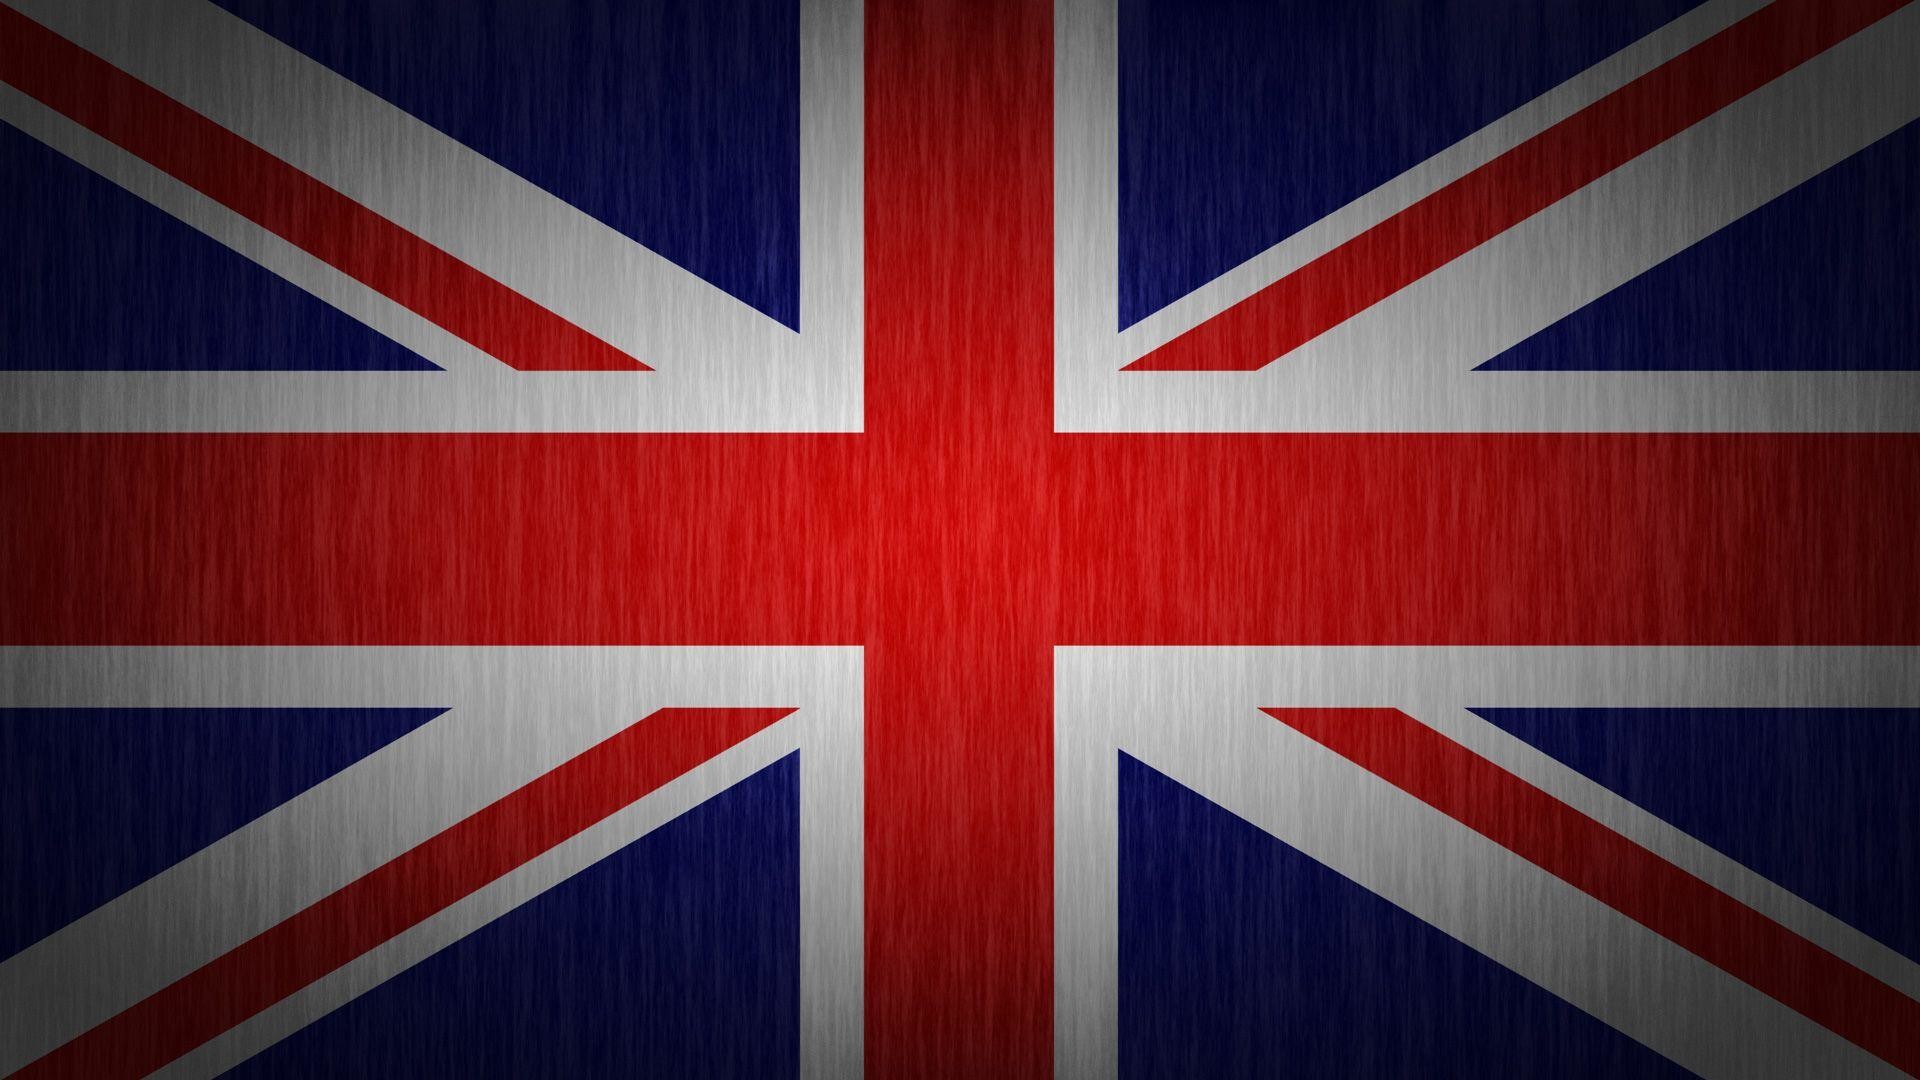 1920x1080 England Flag Wallpaper | British UK Flag Images | New Wallpapers